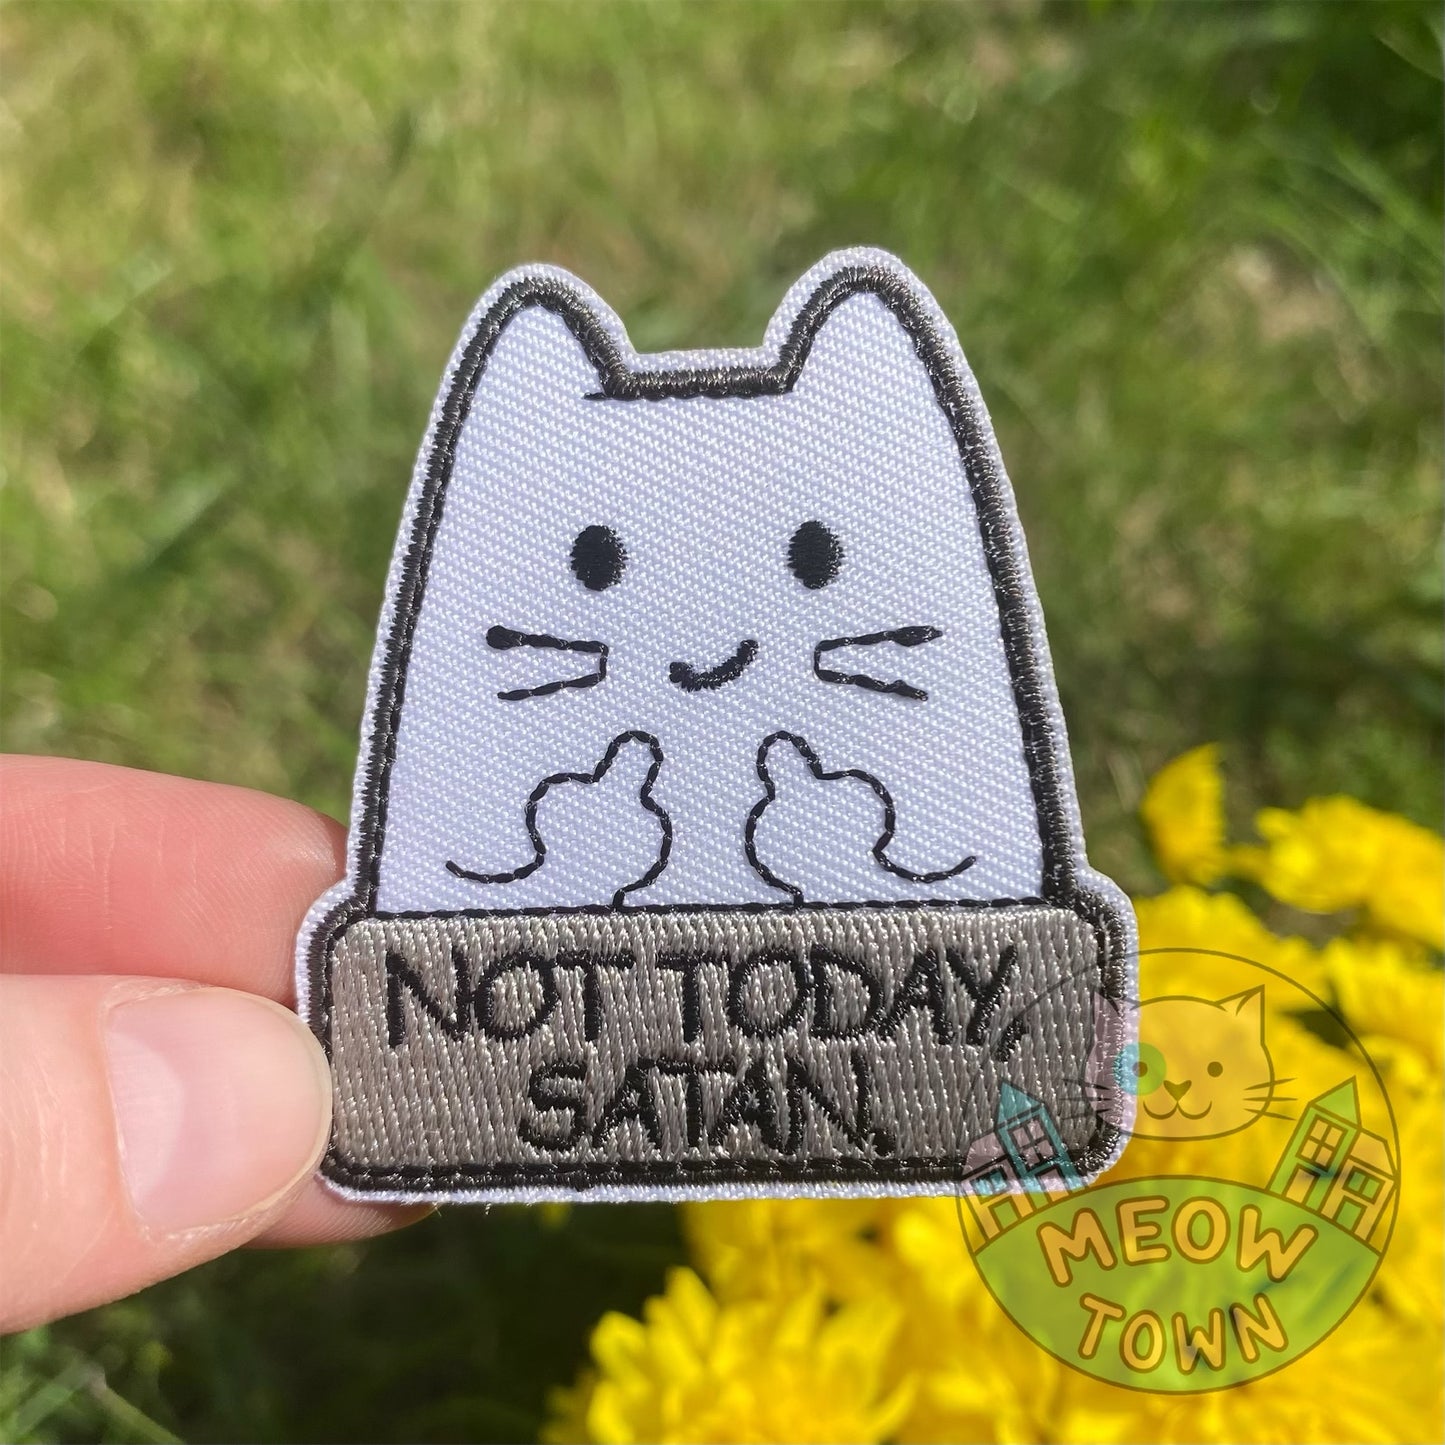 Funny embroidered iron-on patch with a cute kitty and ‘Not Today Satan’ slogan. A perfect way to bring new life to your old garments or to cover small holes or marks with this cute kitty!